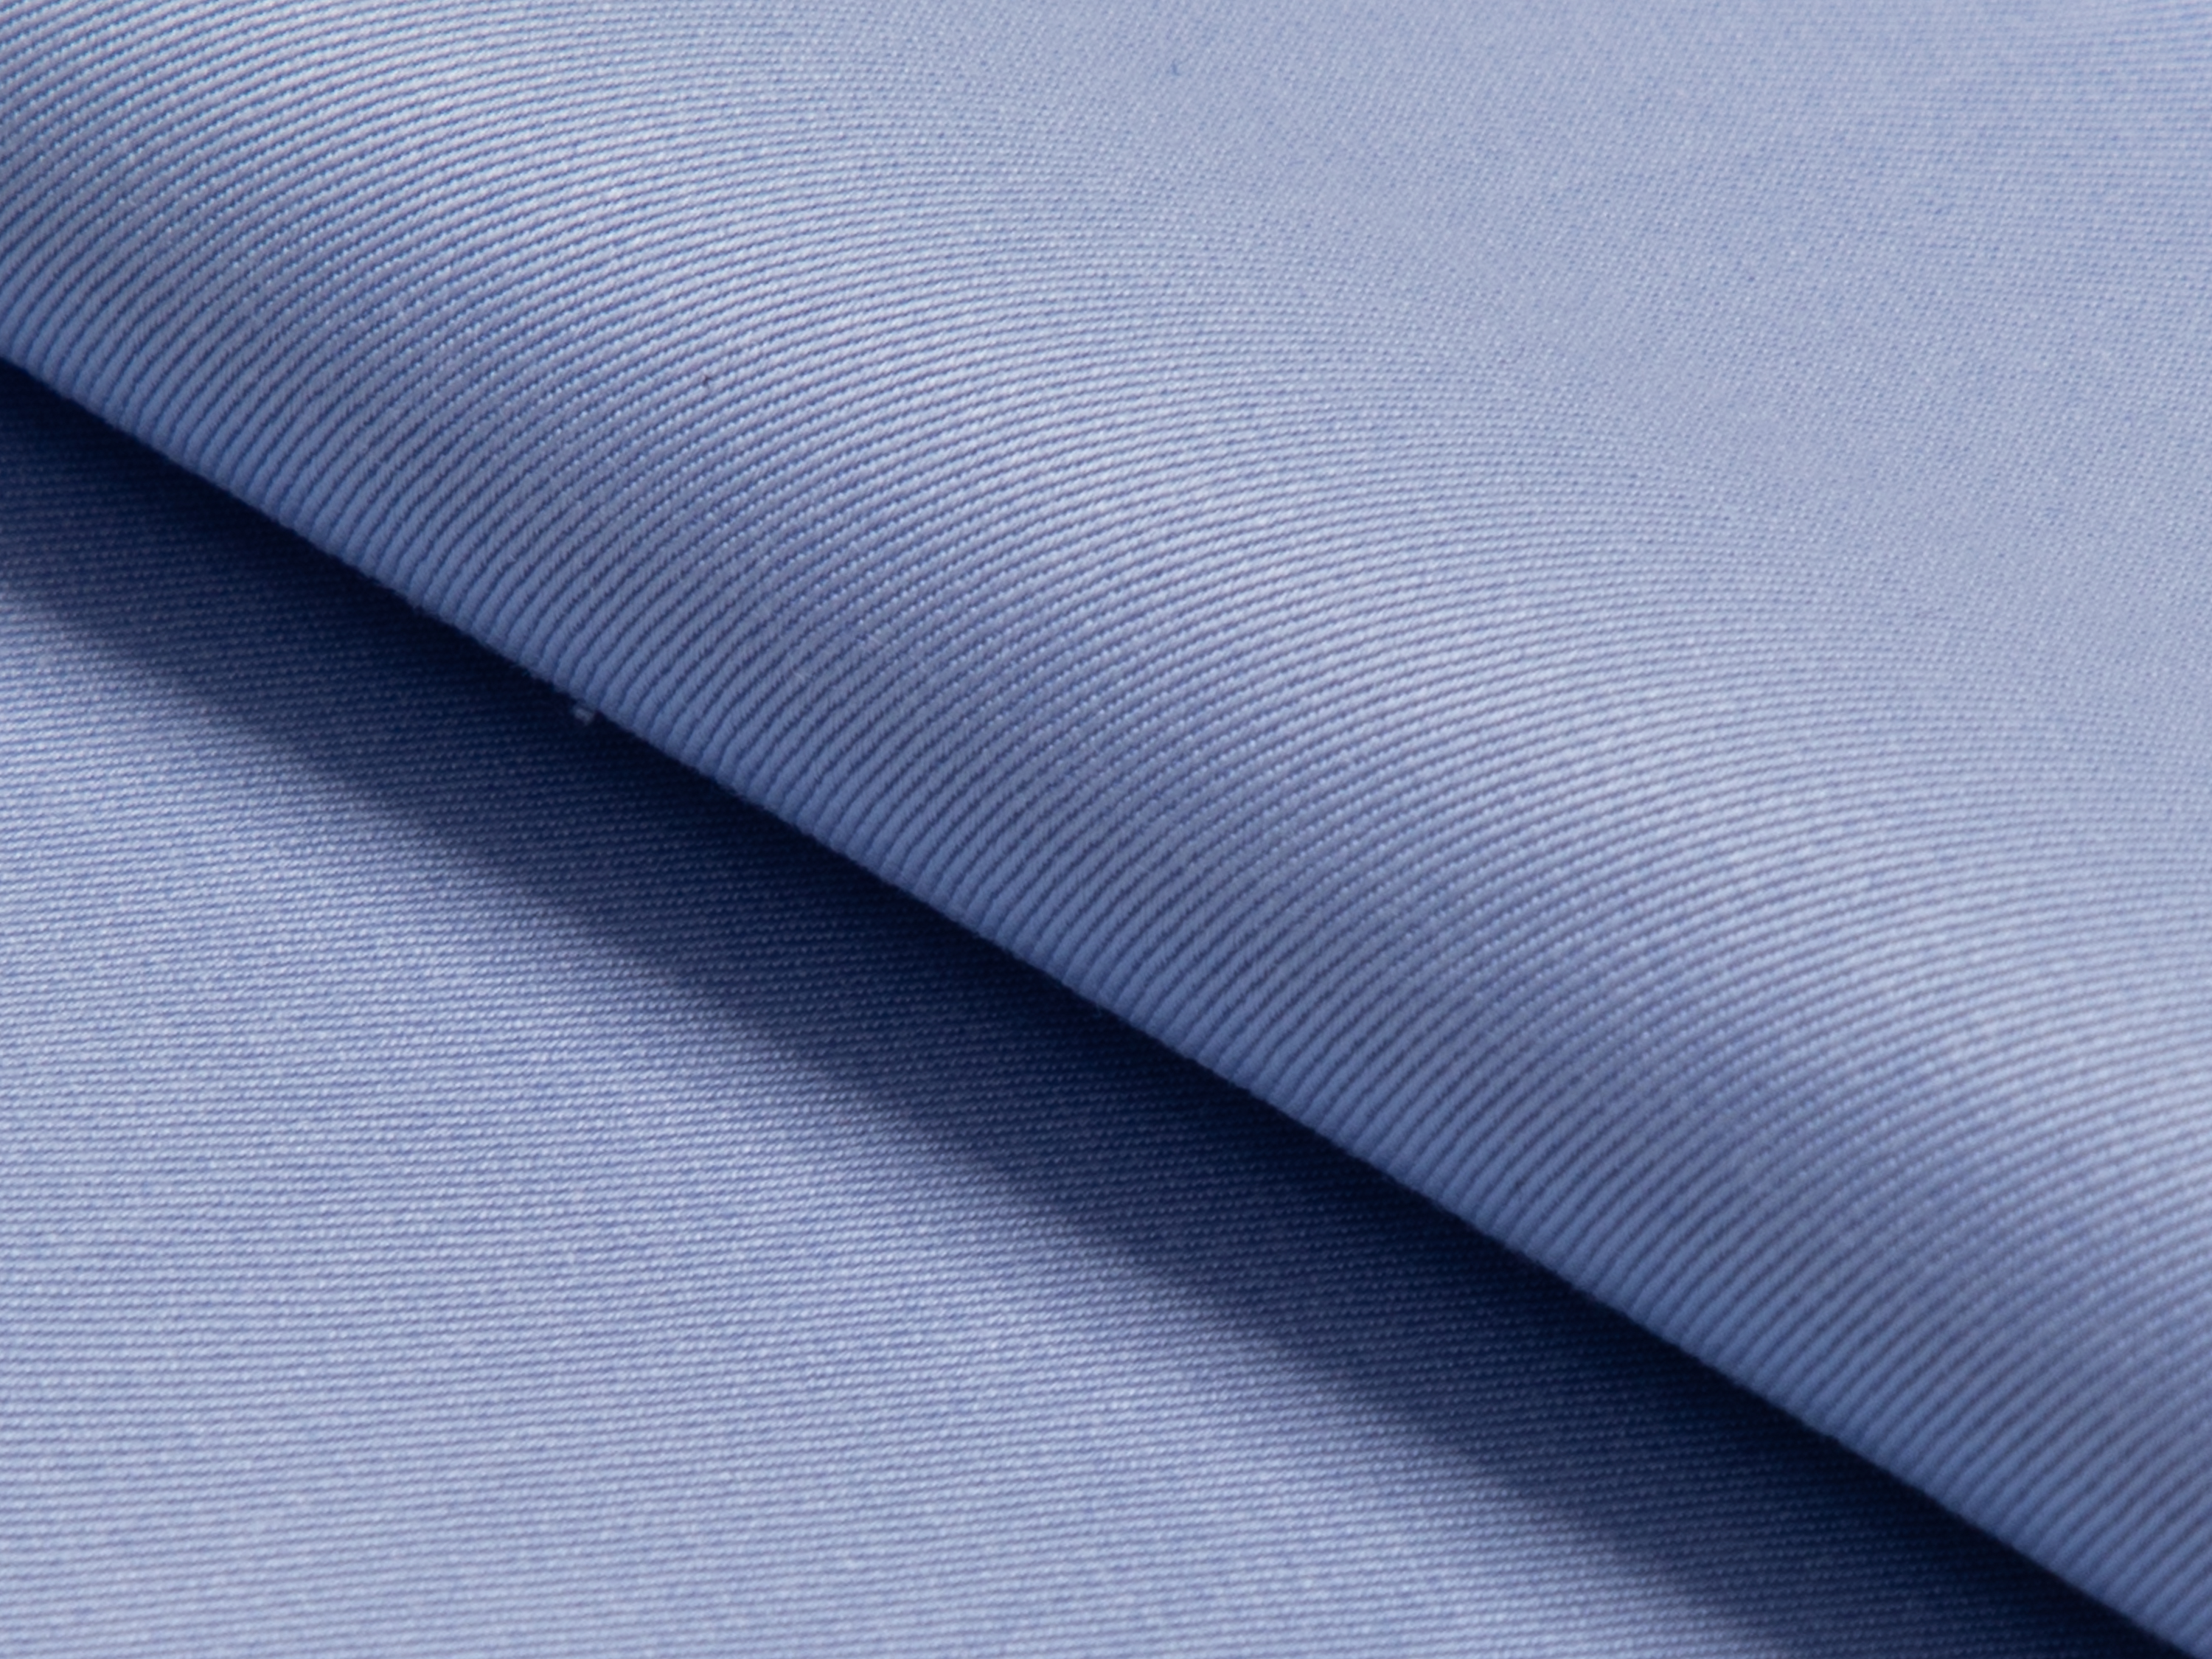 Buy tailor made shirts online - MAYFAIR - Twill Blue